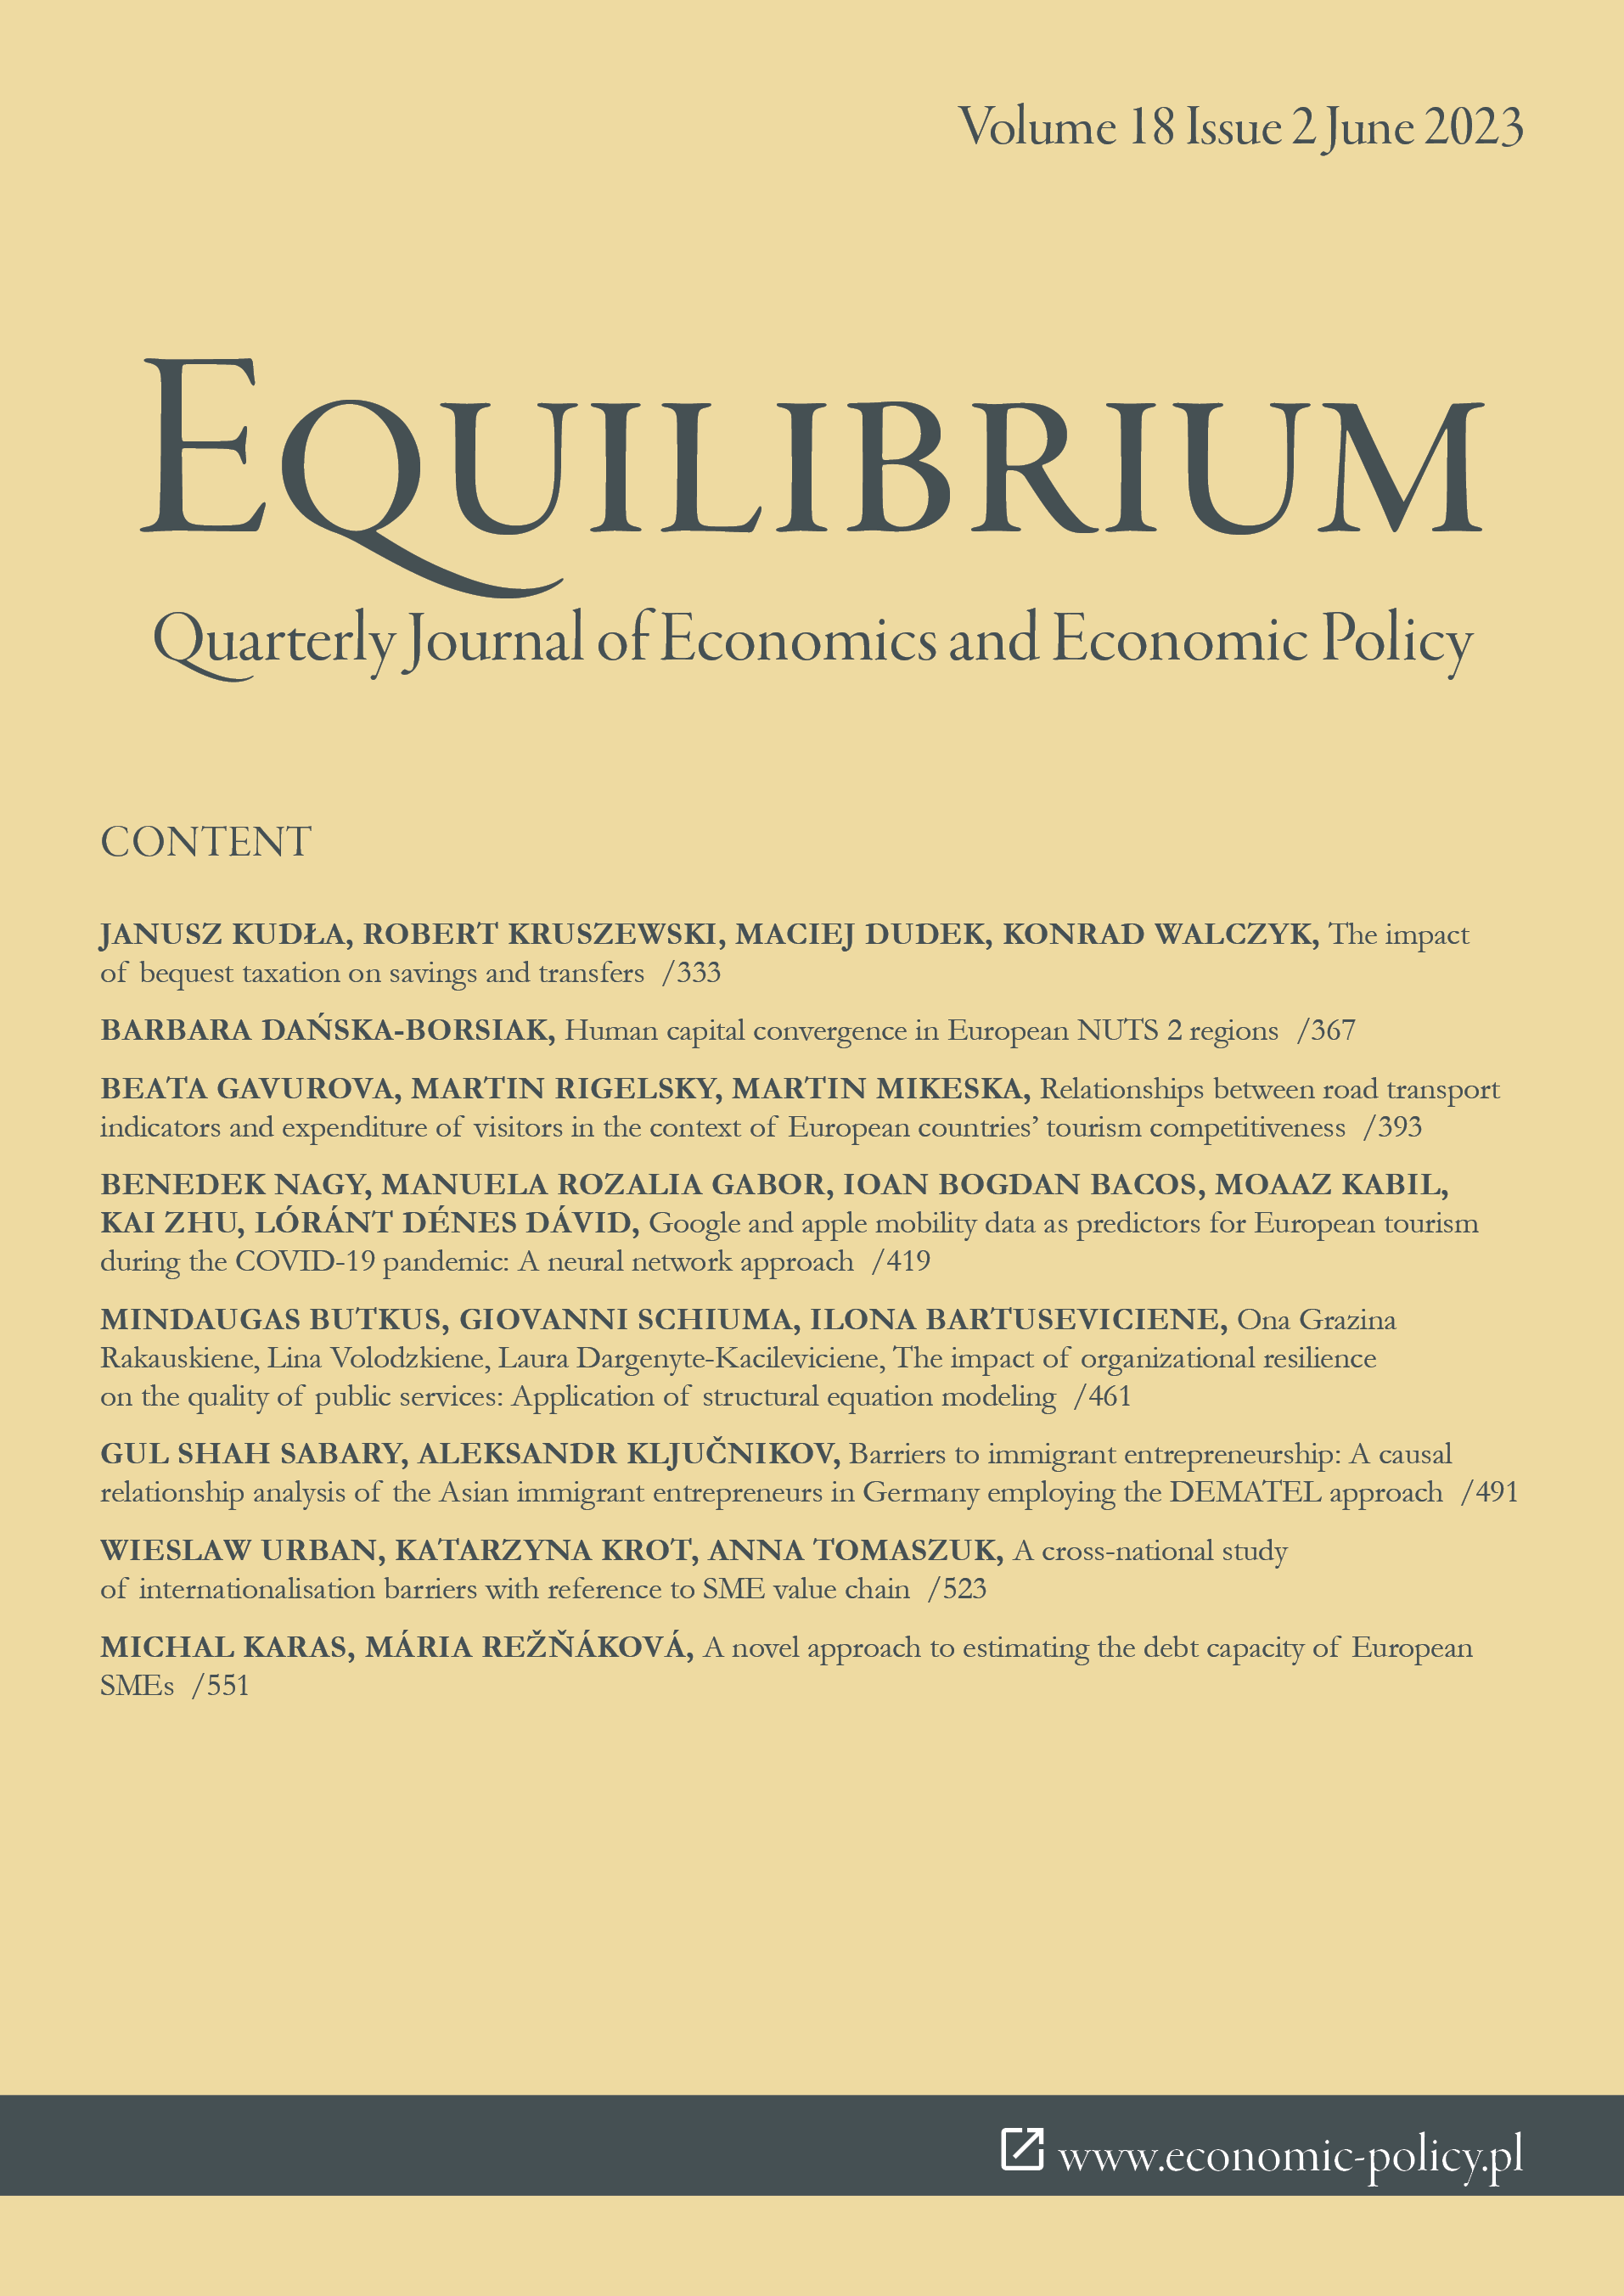 Barriers to immigrant entrepreneurship: A causal relationship analysis of the Asian immigrant entrepreneurs in Germany employing the DEMATEL approach Cover Image